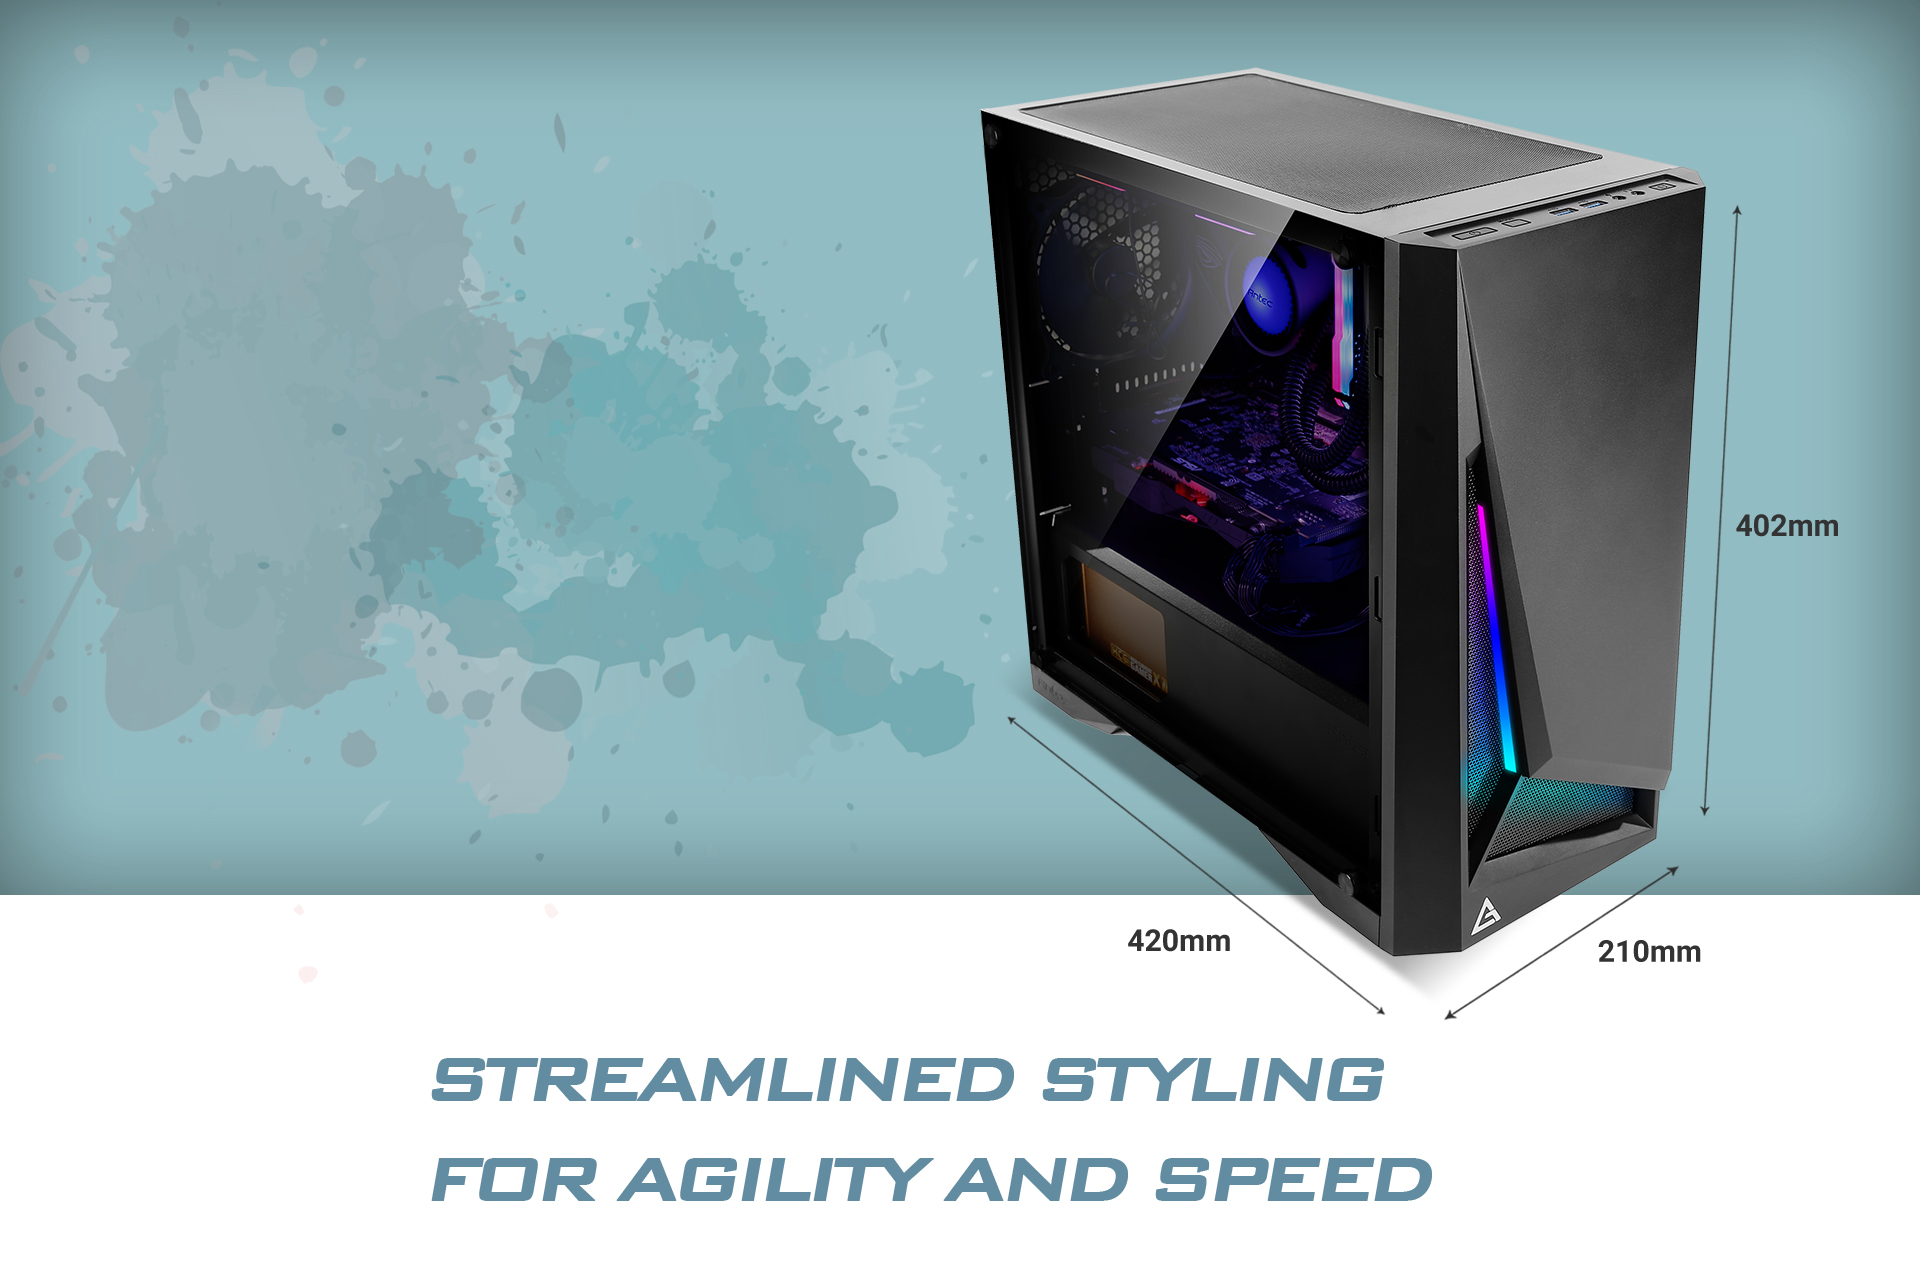 Antec DP301M case angled down to the right with text indicating 420mm depth, 210mm width and 402mm height. There is text below the case that reads: STREAMLINED STYLING FOR AGILITY AND SPEED